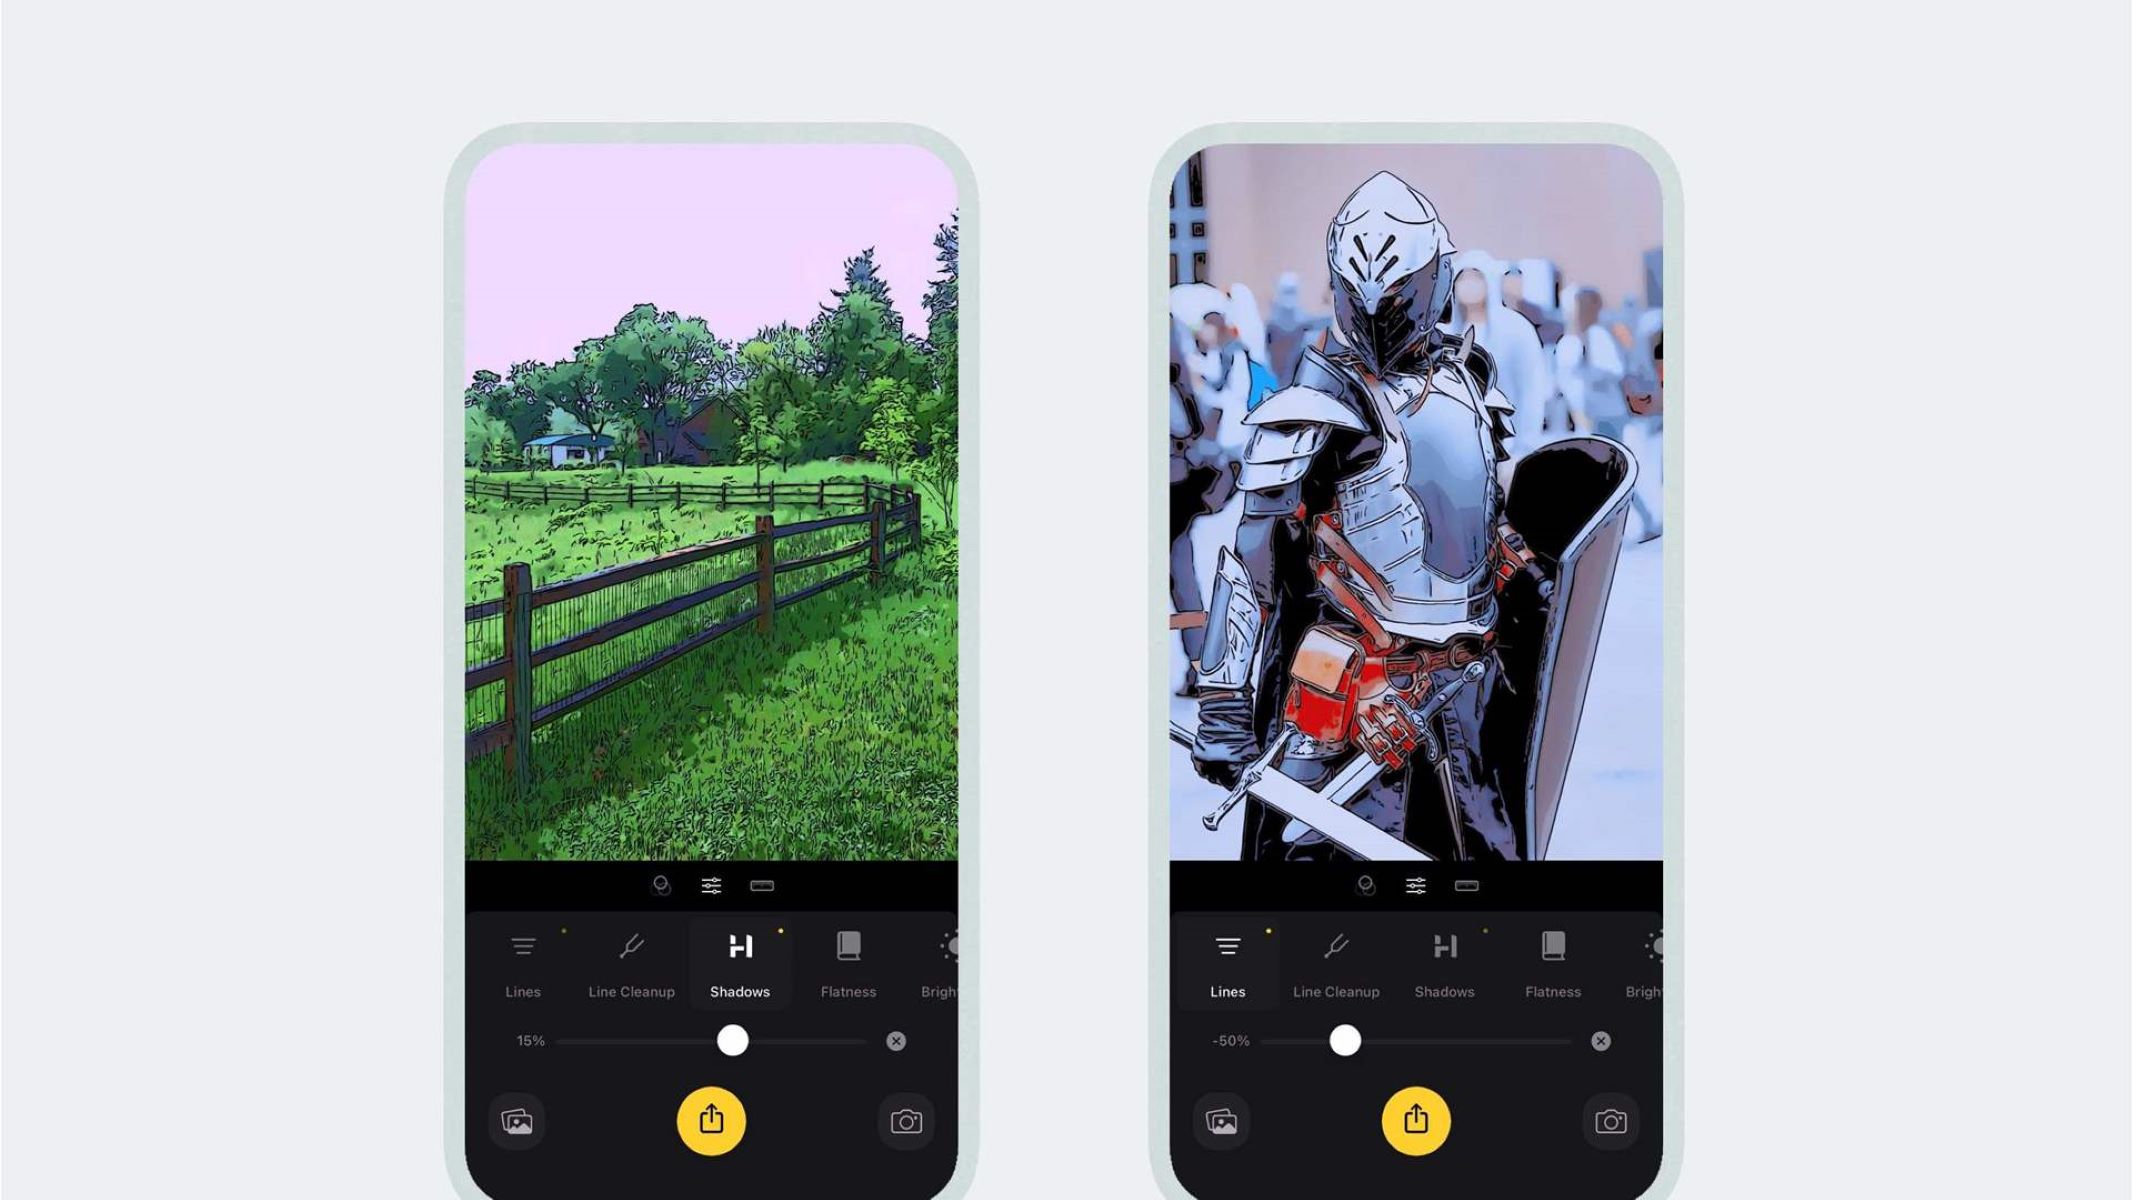 new-camera-app-cinemin-lets-users-capture-animated-photos-and-videos-without-ai-filters